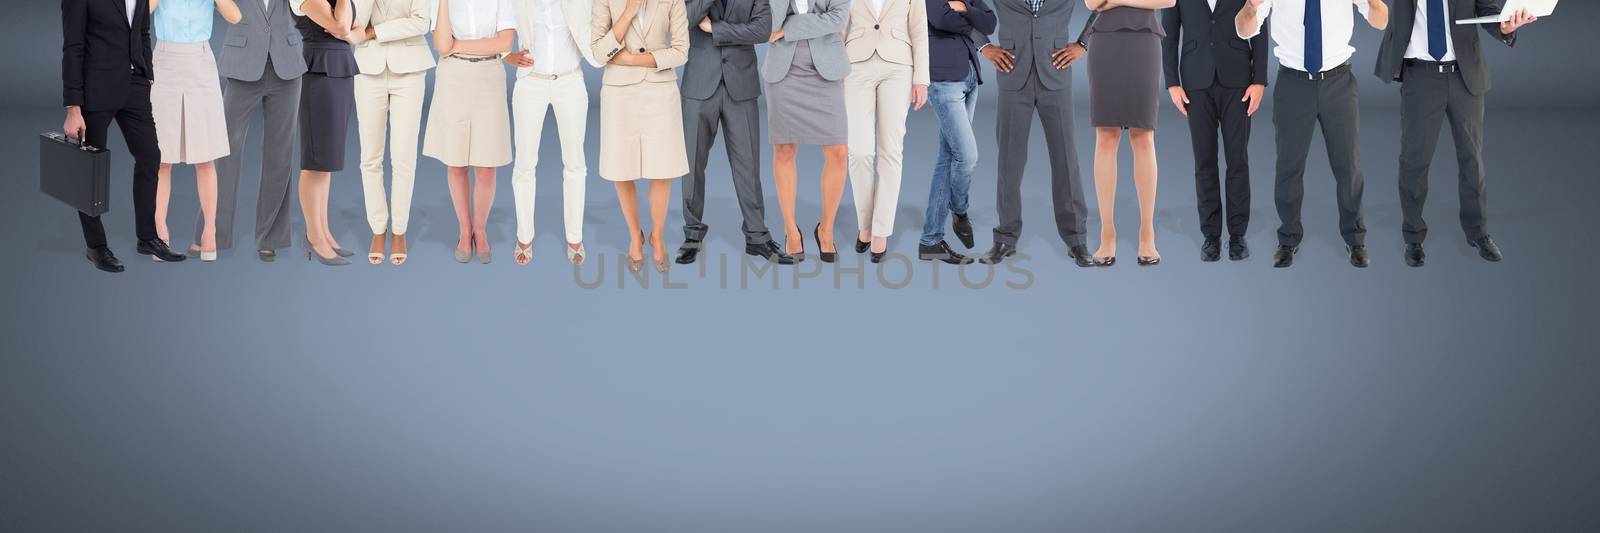 Group of Business People standing with blue vignette background by Wavebreakmedia